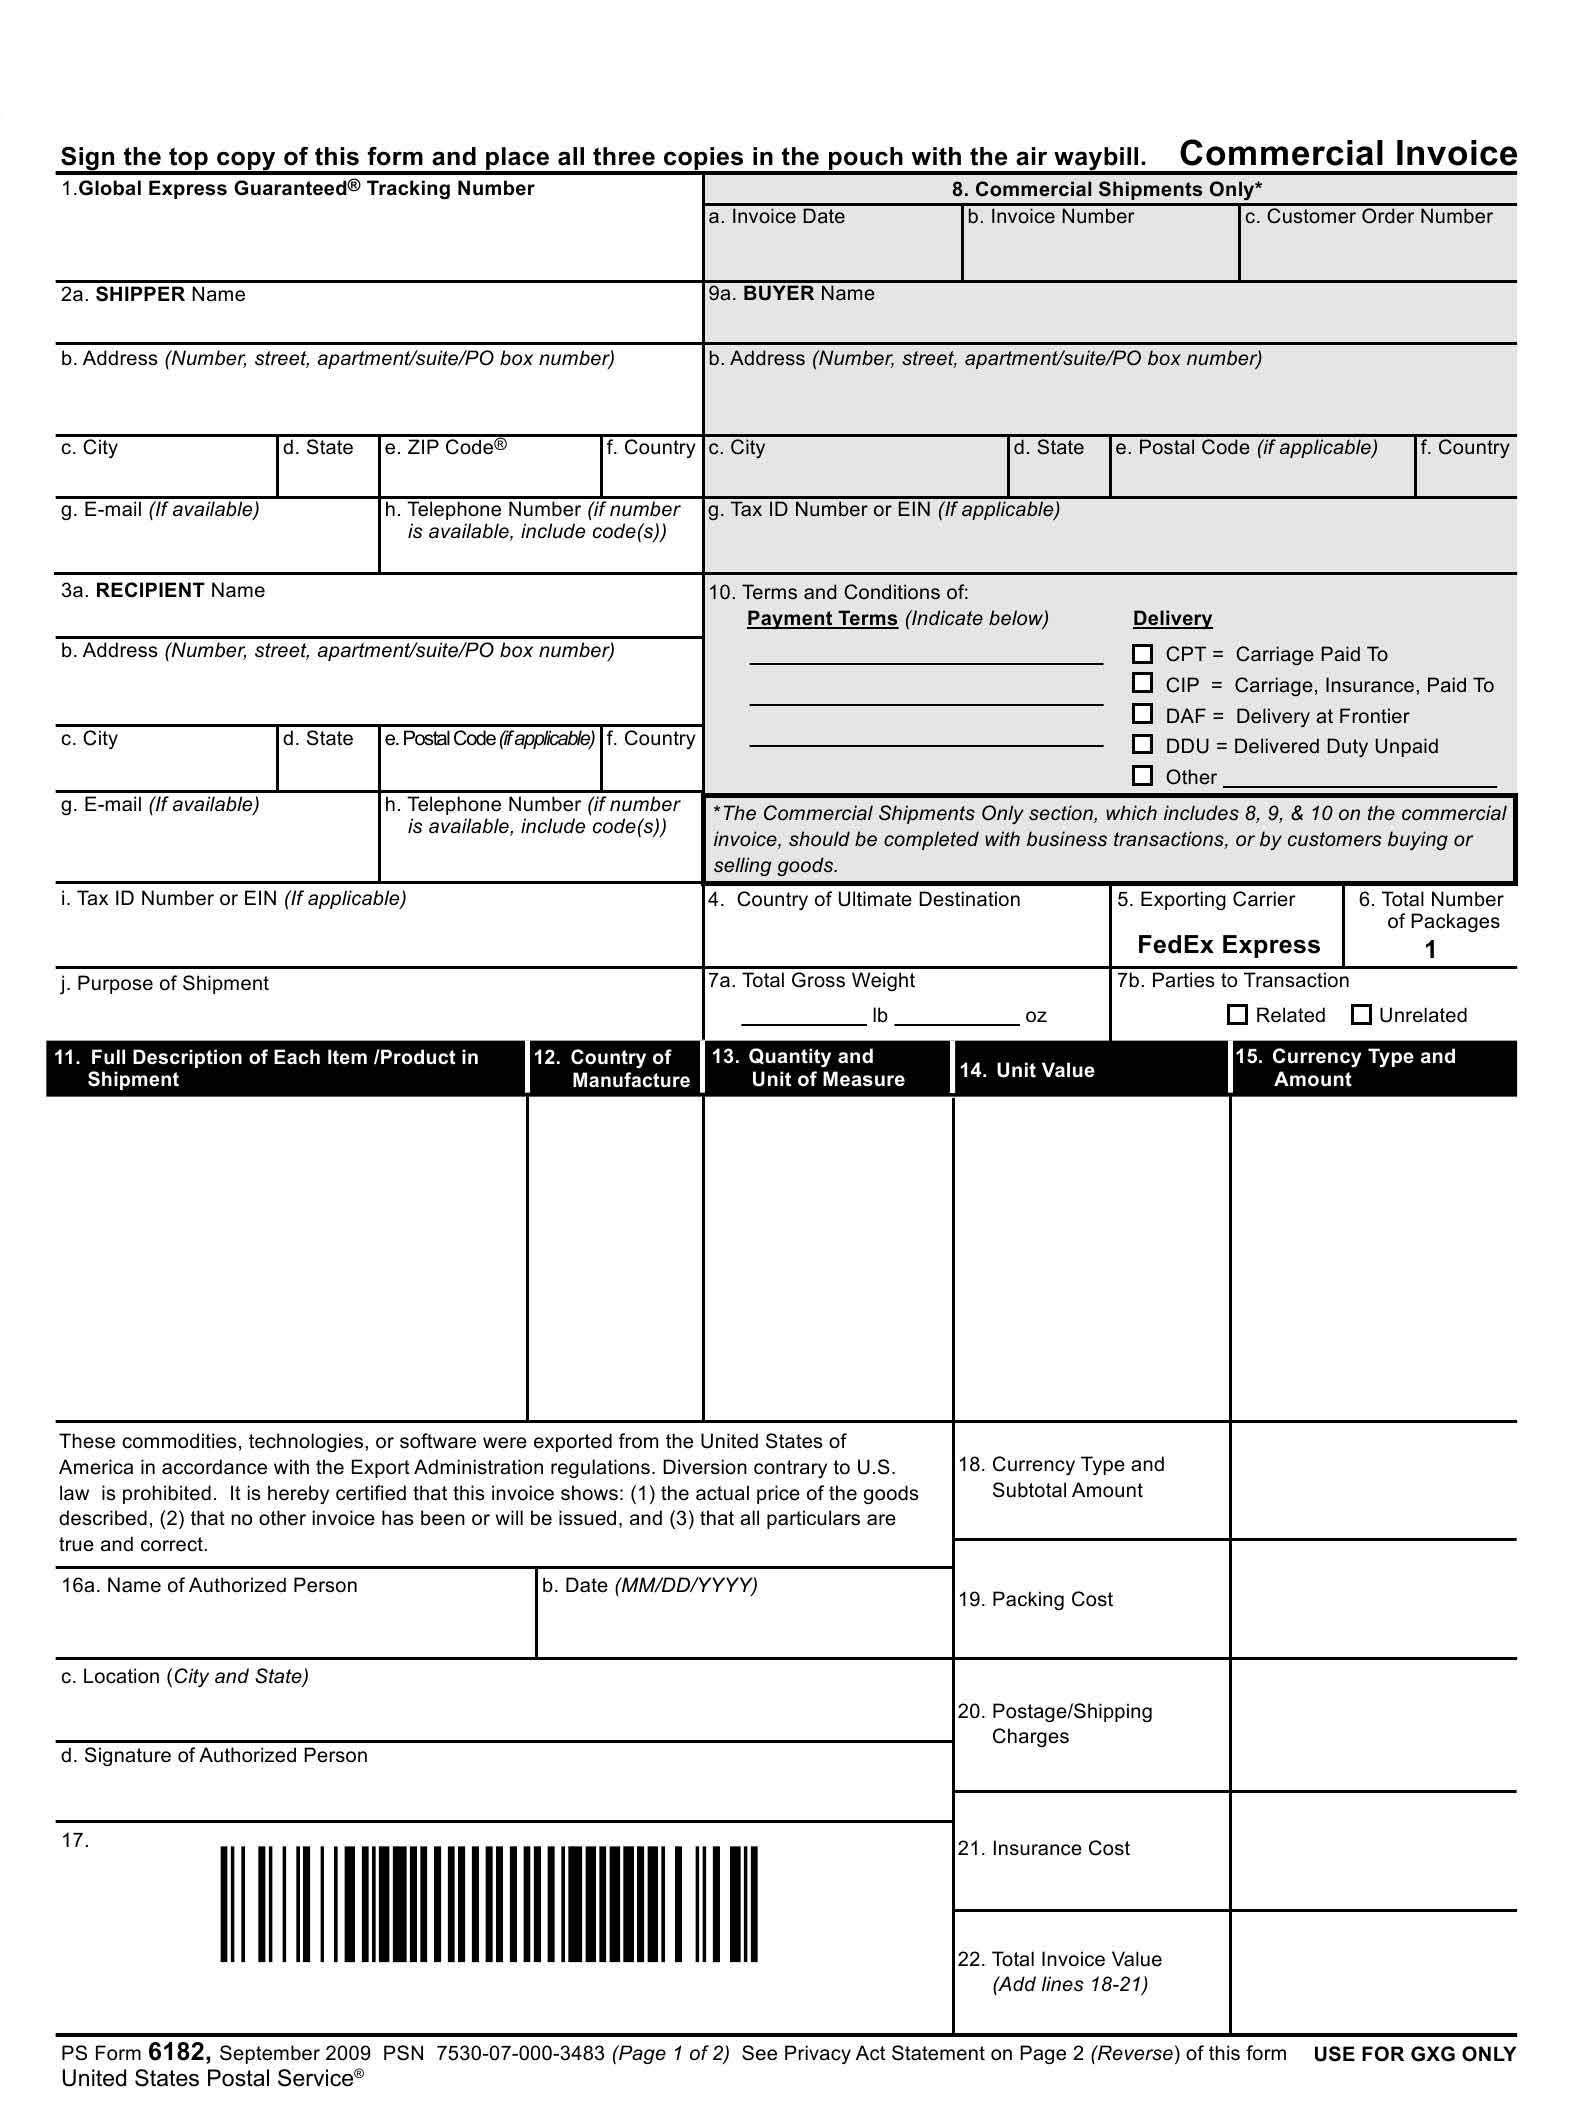 commercial invoice commercial invoice template ups